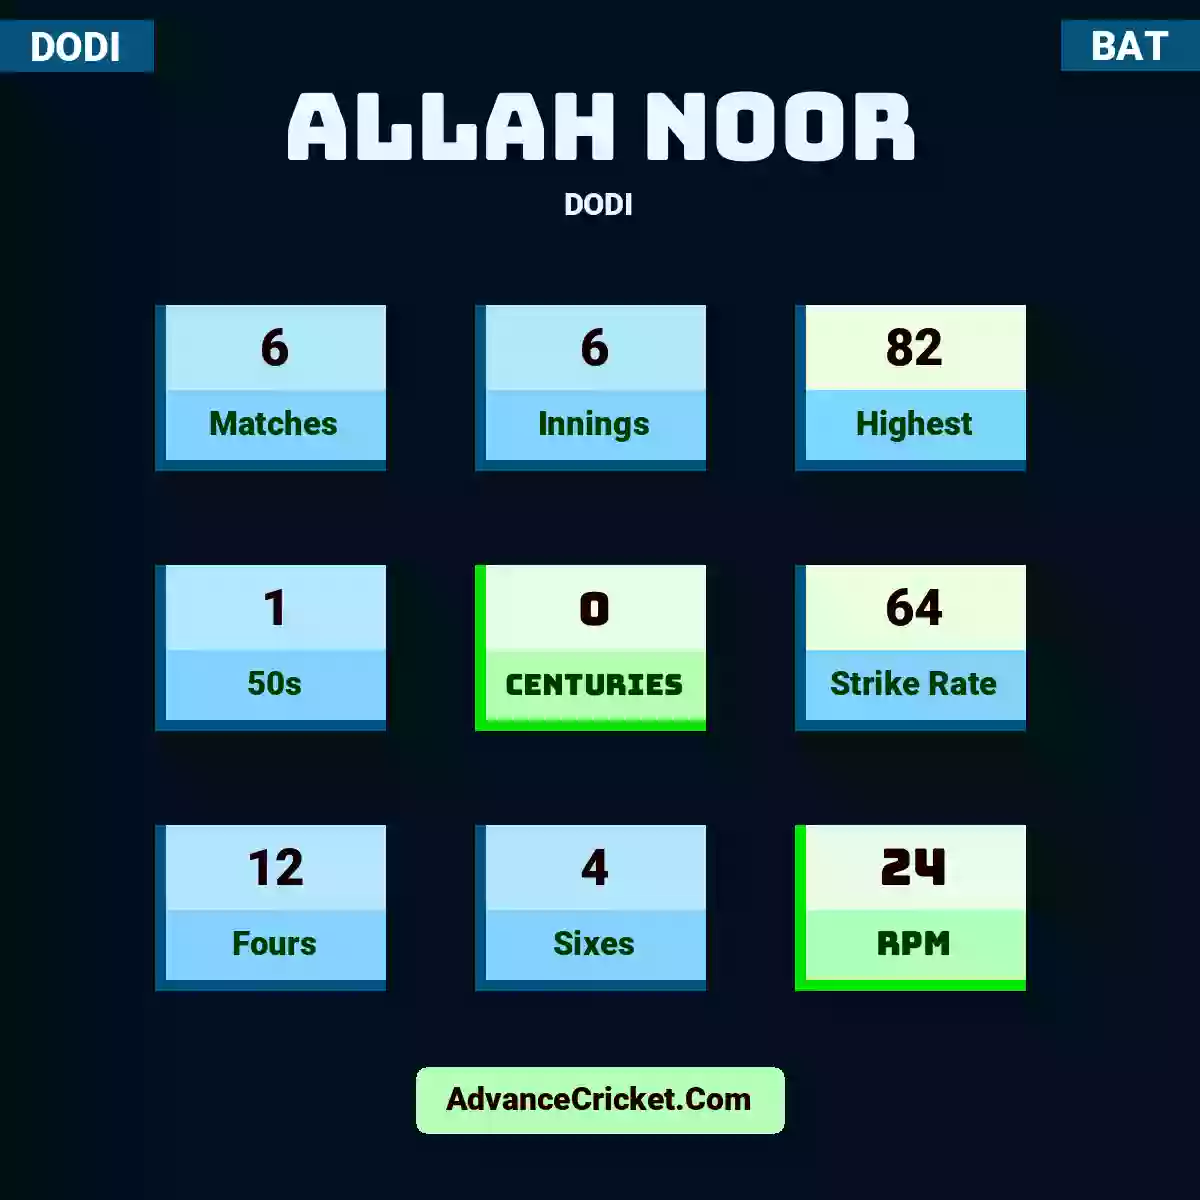 Allah Noor DODI , Allah Noor played 6 matches, scored 82 runs as highest, 1 half-centuries, and 0 centuries, with a strike rate of 64. A.Noor hit 12 fours and 4 sixes, with an RPM of 24.